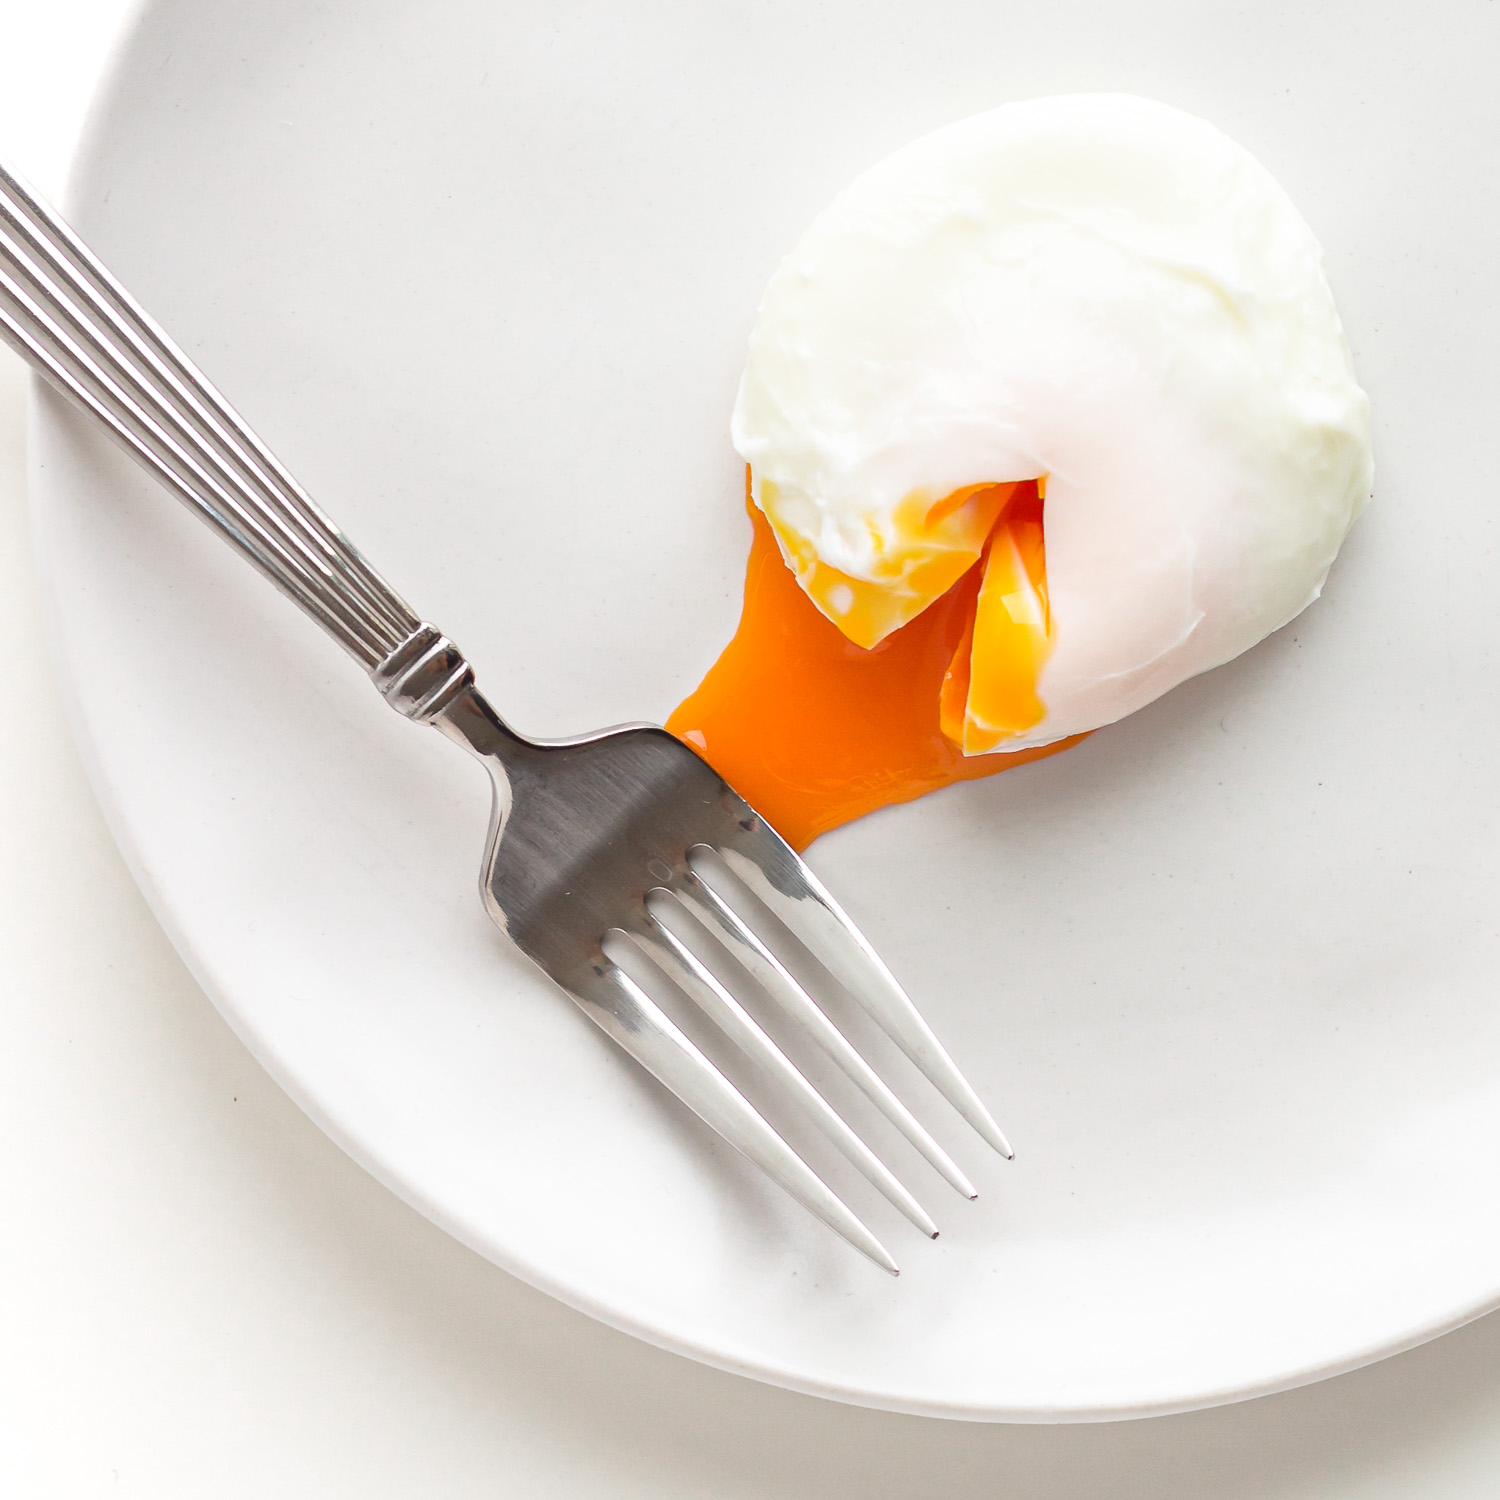 A single poached egg with some yolk oozing out on a white plate with a fork.